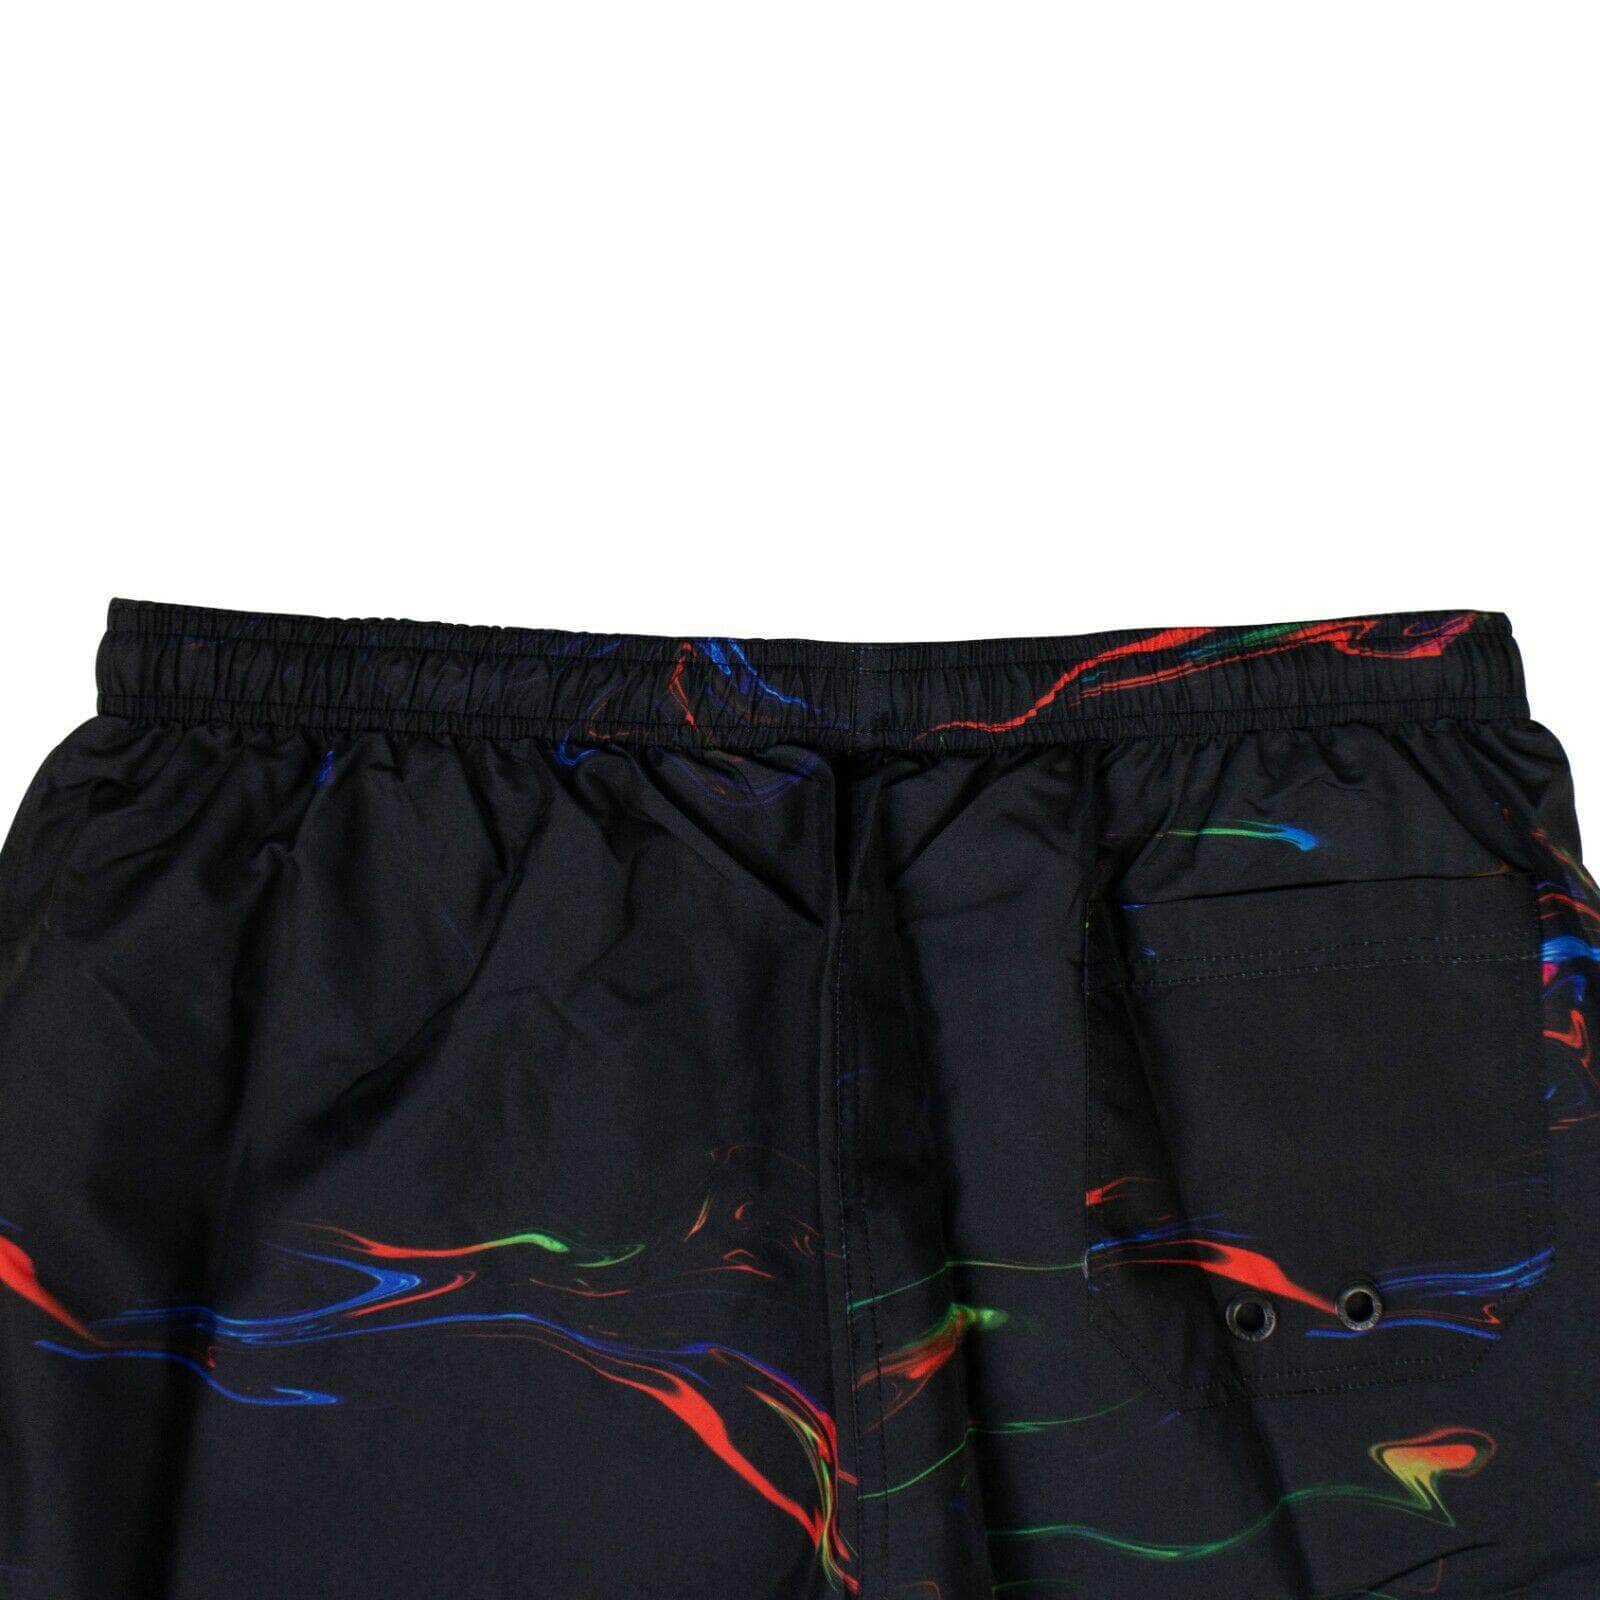 Marcelo Burlon chicmi, couponcollection, gender-mens, july4th, main-clothing, marcelo-burlon, marcelo12, MBUP, mens-bathing-suits, mens-shoes, size-xxs, under-250 XXS Polyester 'All Over Lights' Beach Shorts - Black 74NGG-MB-1122/XXS 74NGG-MB-1122/XXS